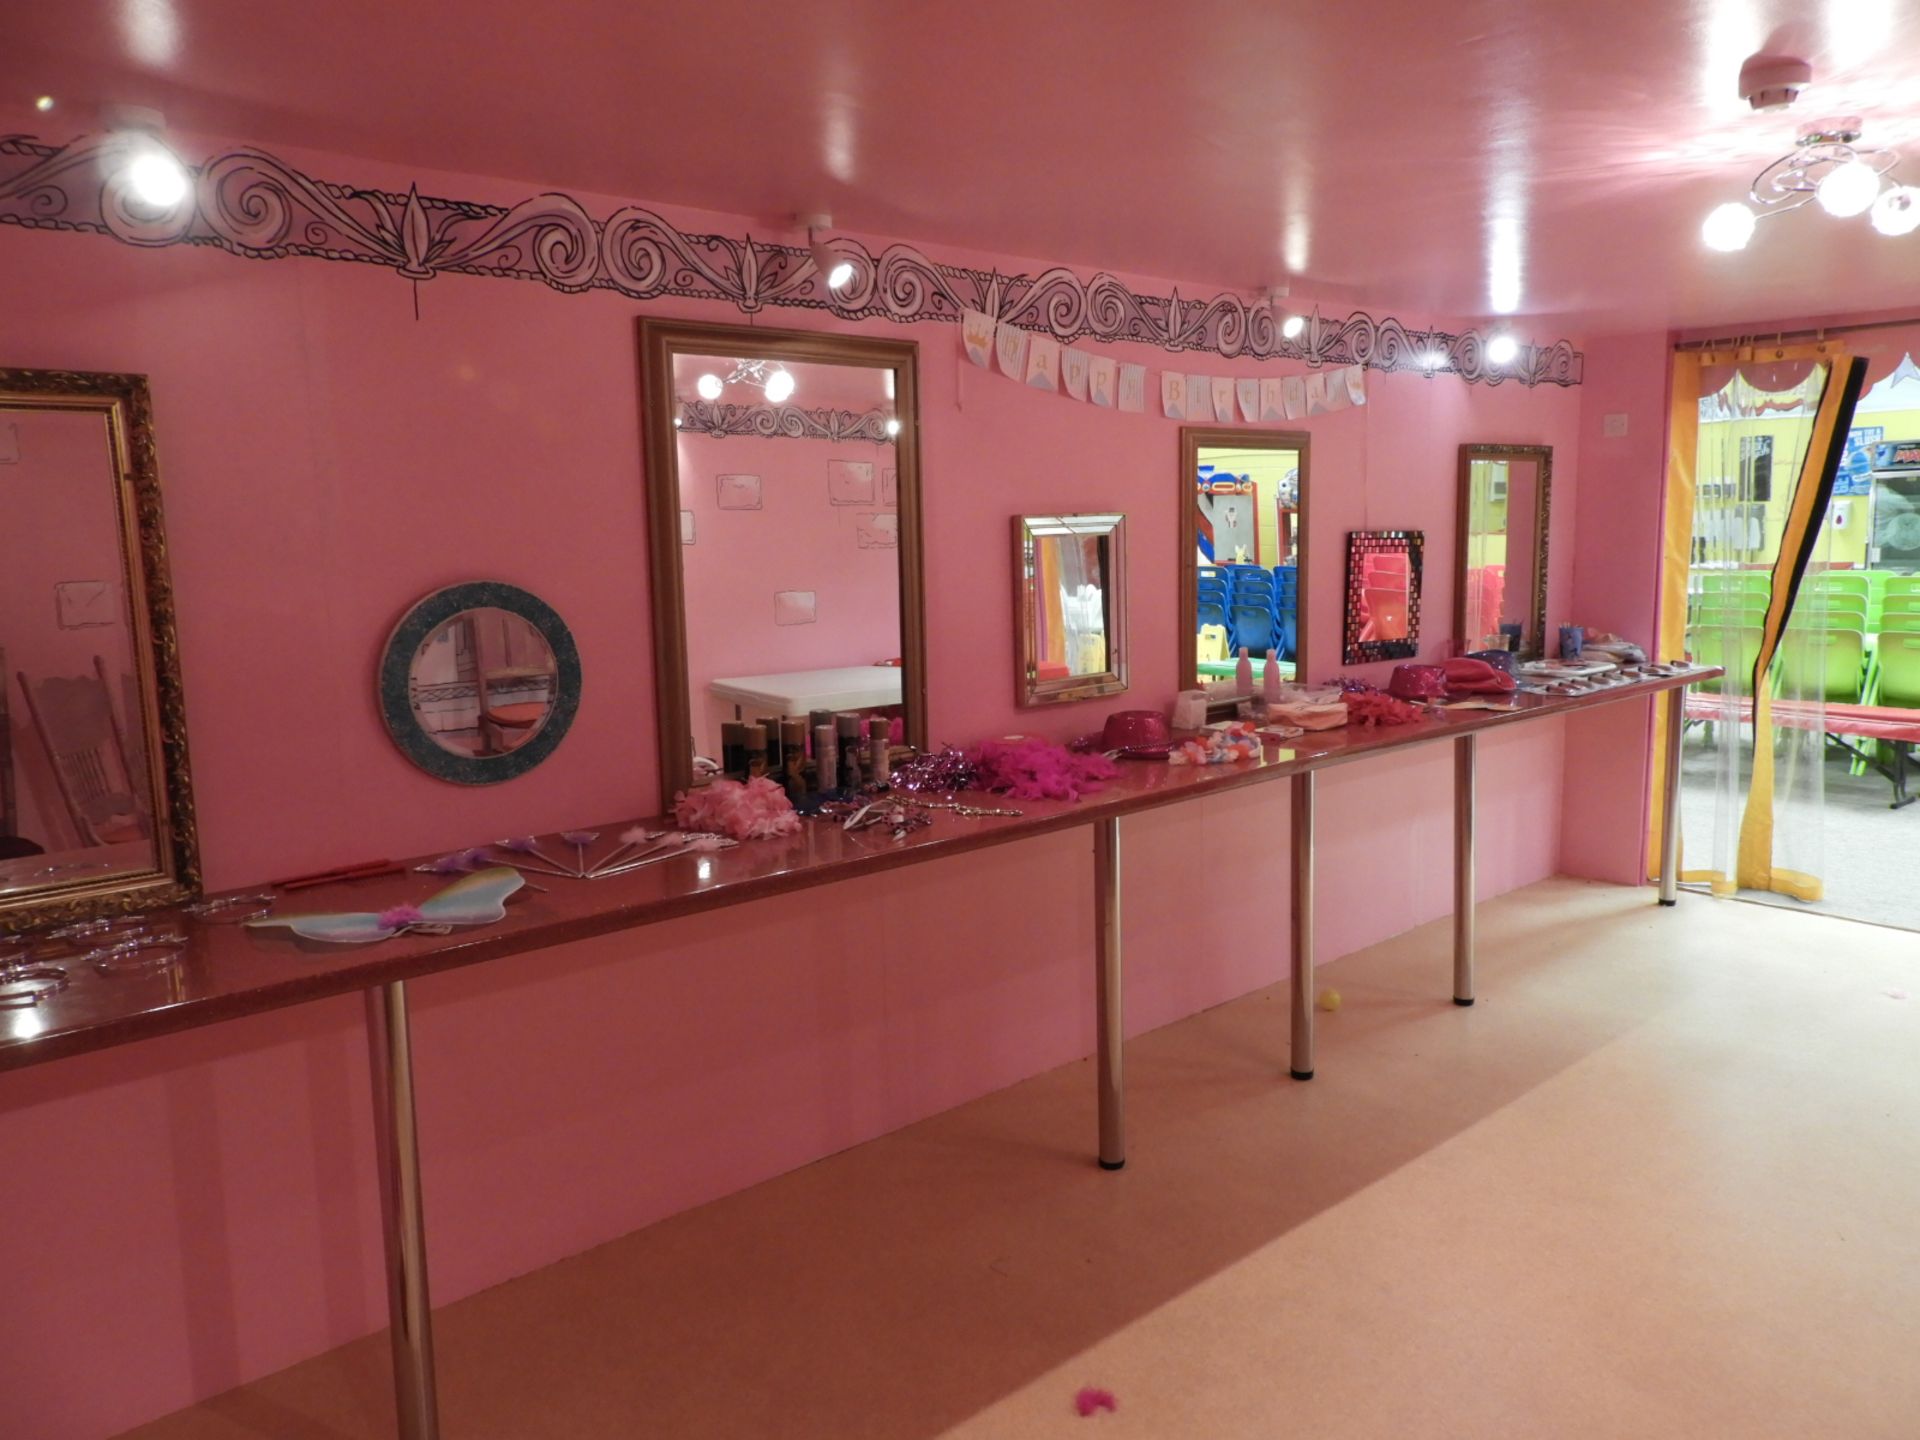 *The Contents of the Princess Party Room - Image 3 of 4